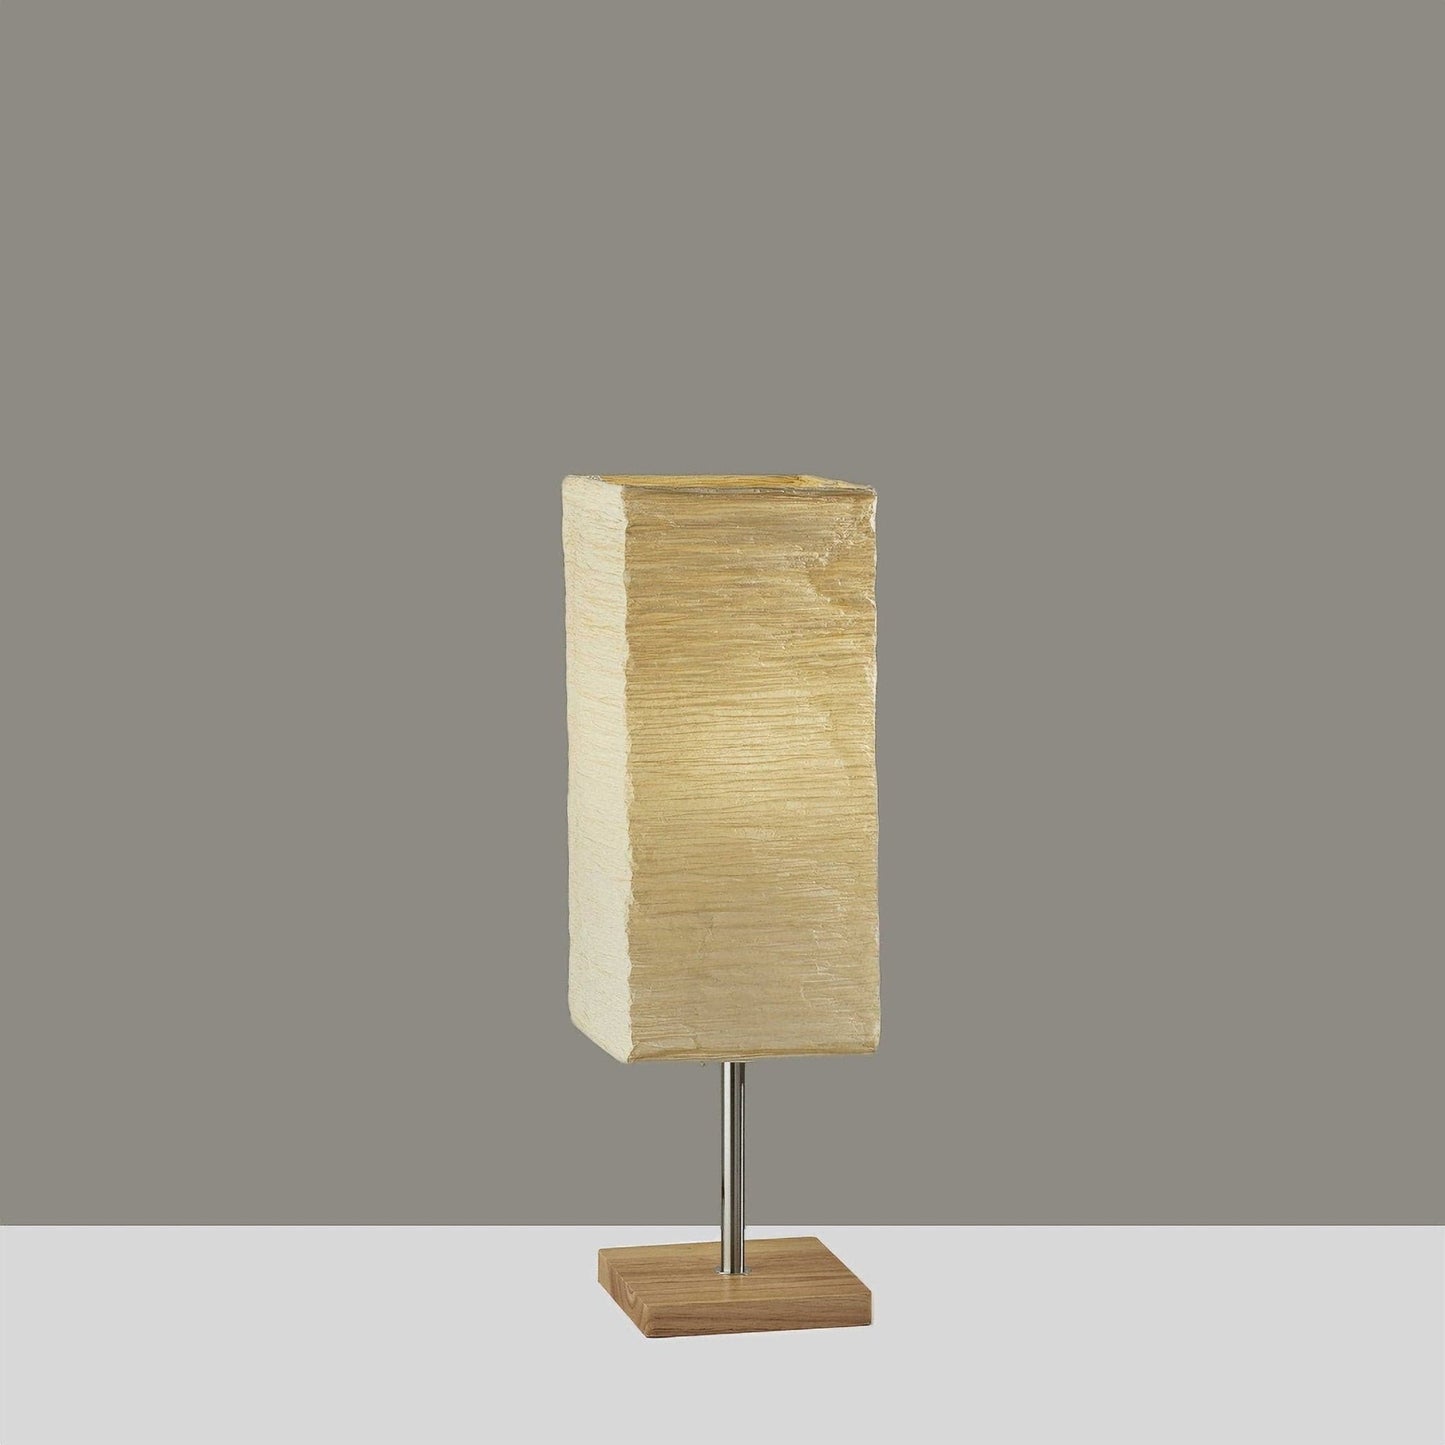 Paper Shade With Natural Wood Table Lamp | Mid Century Table Lamp, Japanese, Scandinavian, Desk Lamp, Bedside Light - TABLE LAMP -